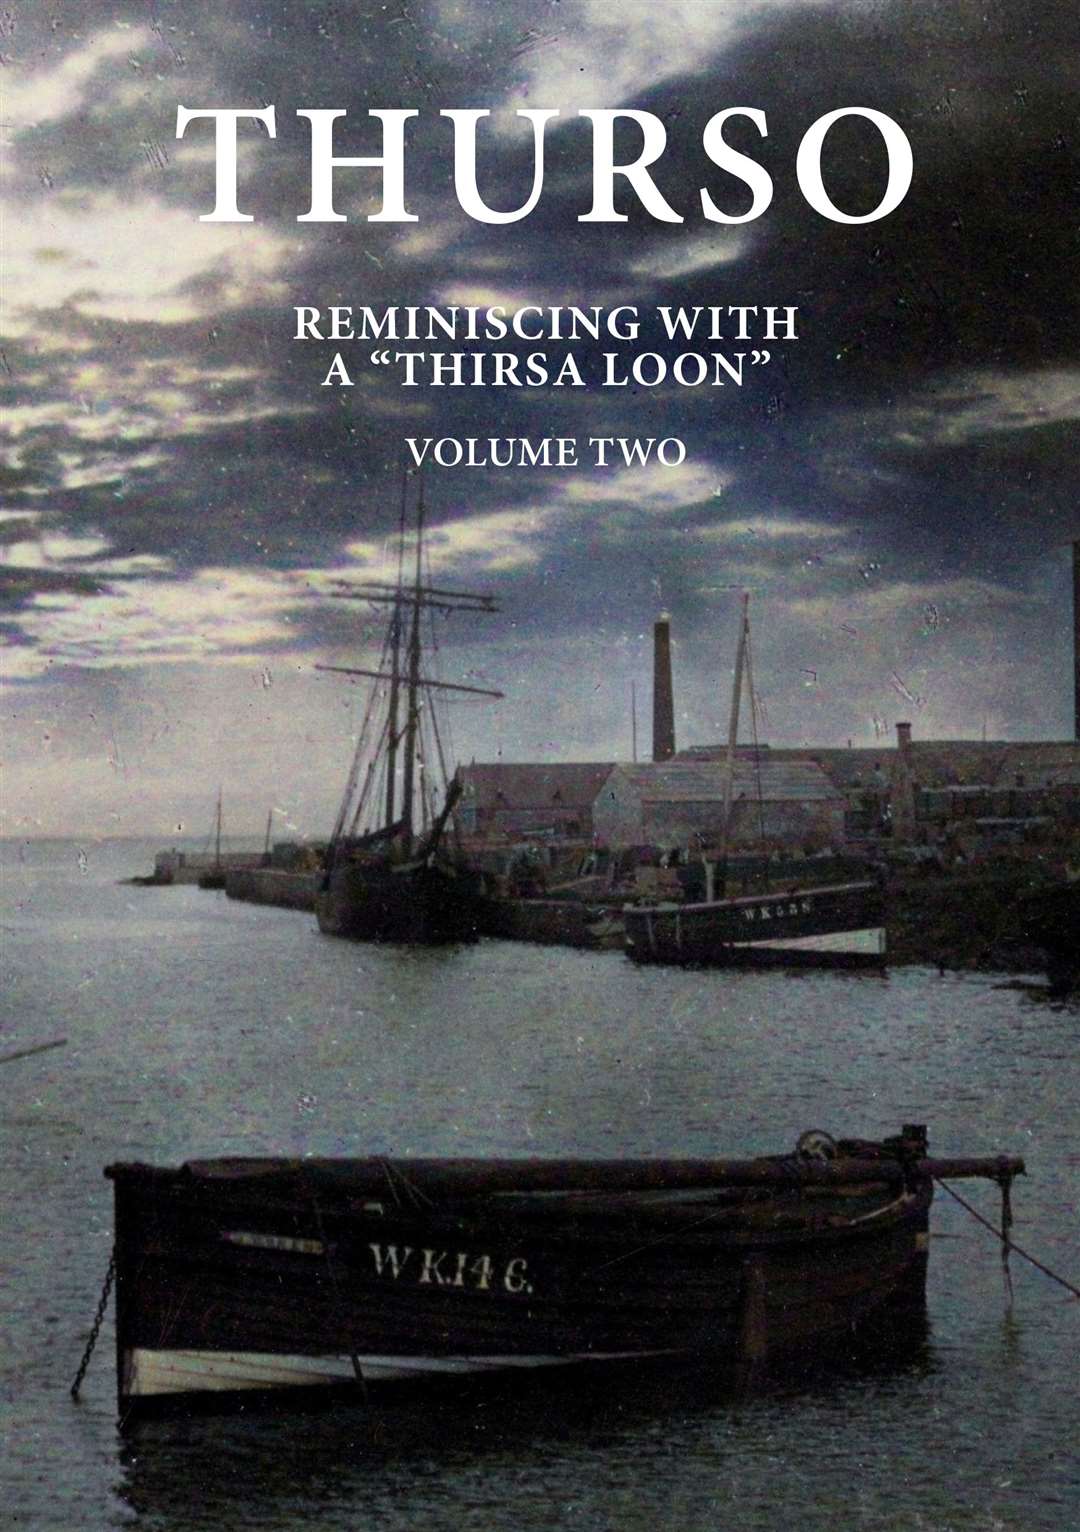 Thurso: Reminiscing with a 'Thirsa Loon', Volume Two, follows on from the initial collection published a year ago.